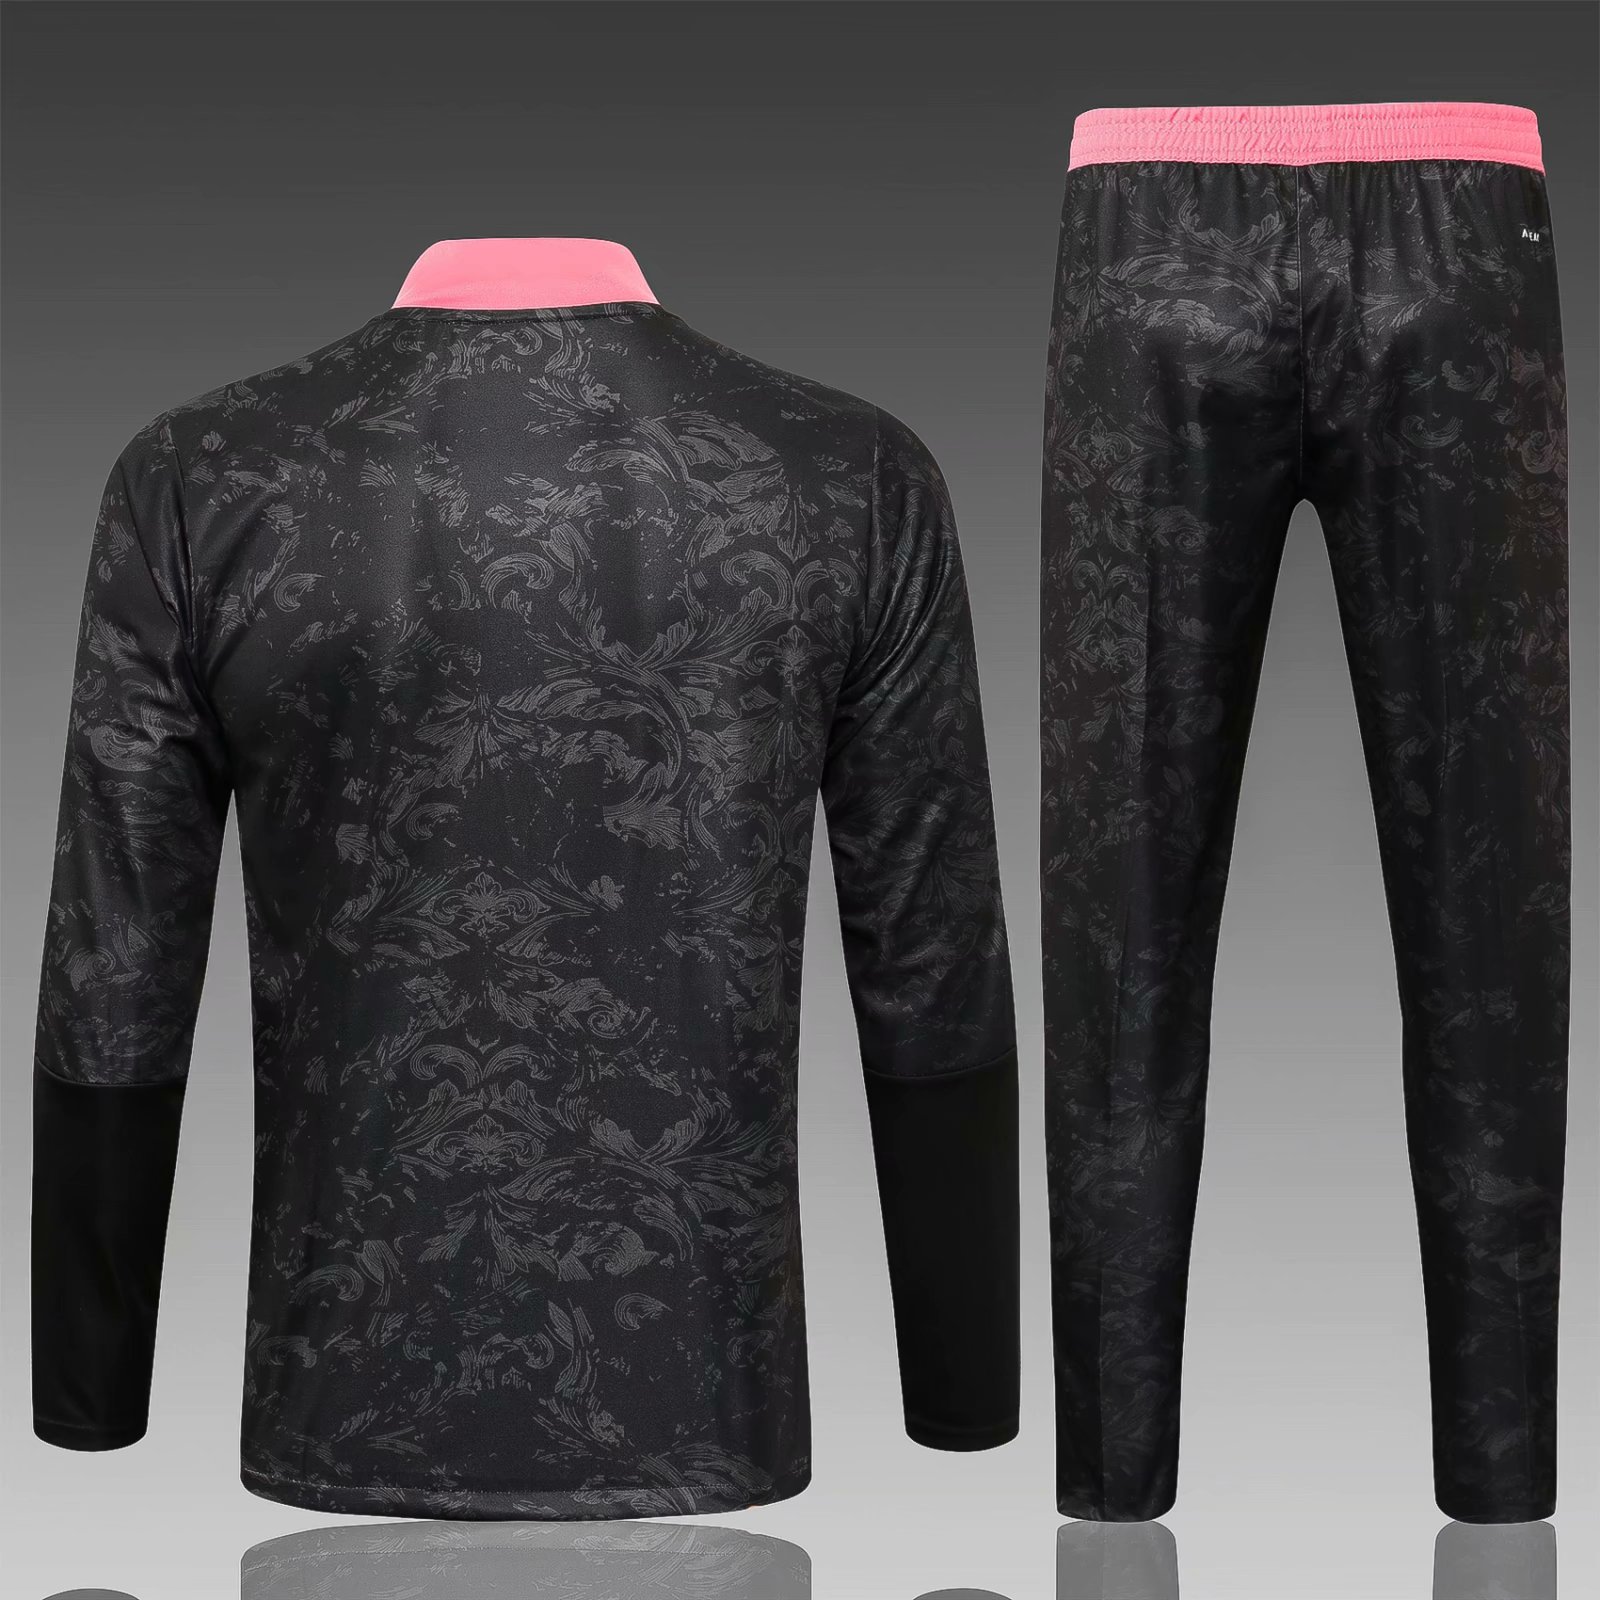 Real Madrid Black - Pink Soccer Training Suit Jacket + Pants Youth 2021/22 